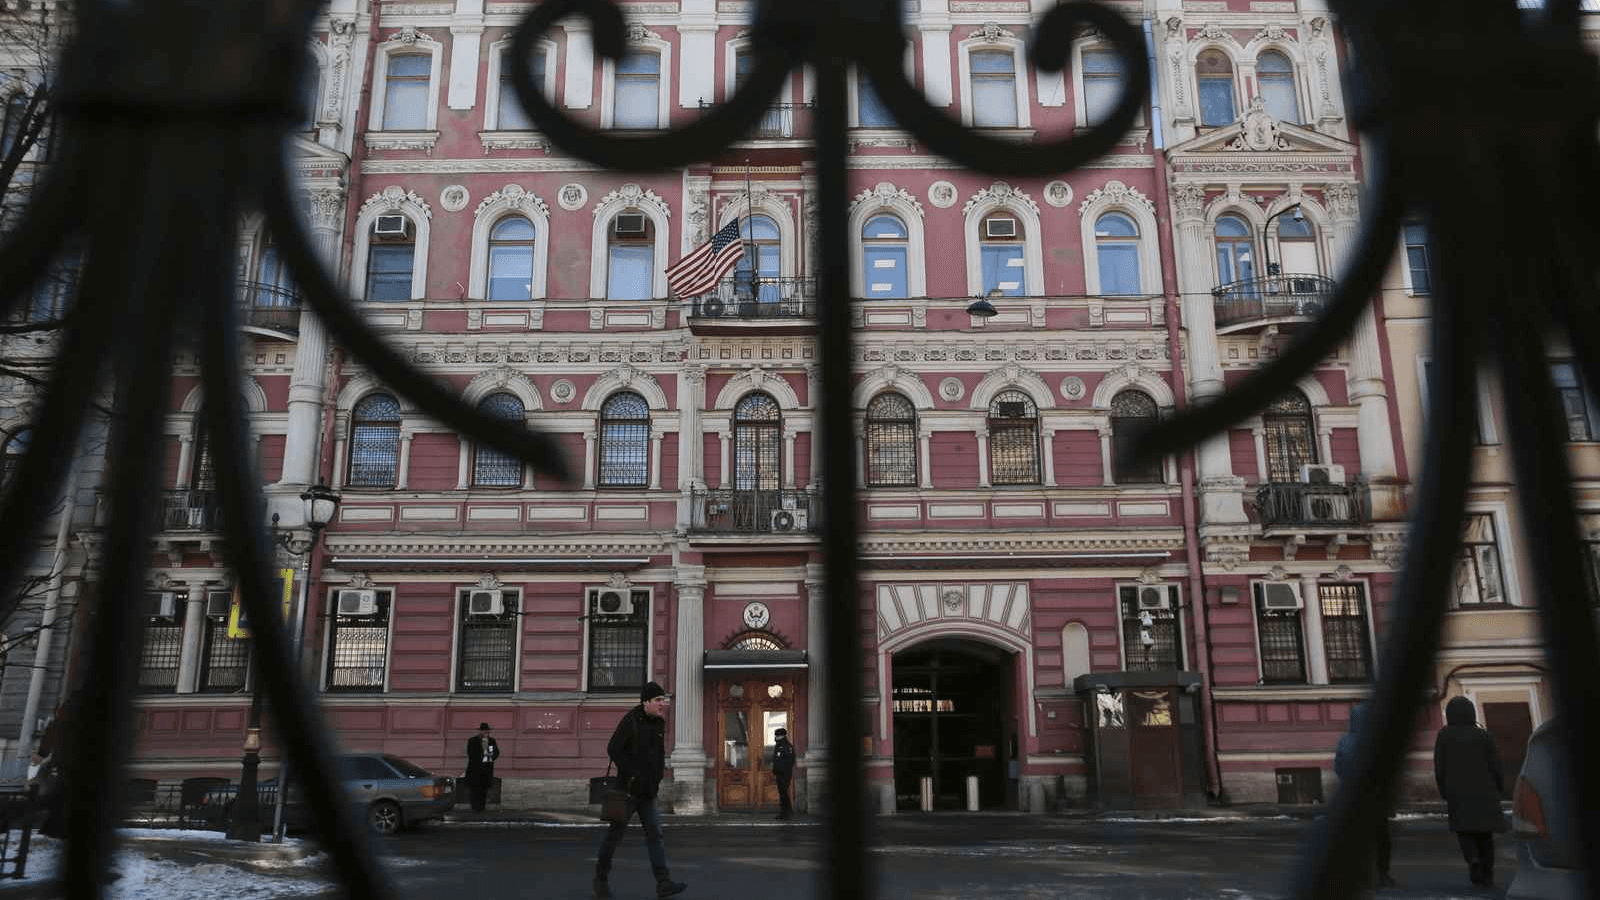 A view through a fence shows the building of the US consulate-general in St. Petersburg, Russia, March 29, 2018.